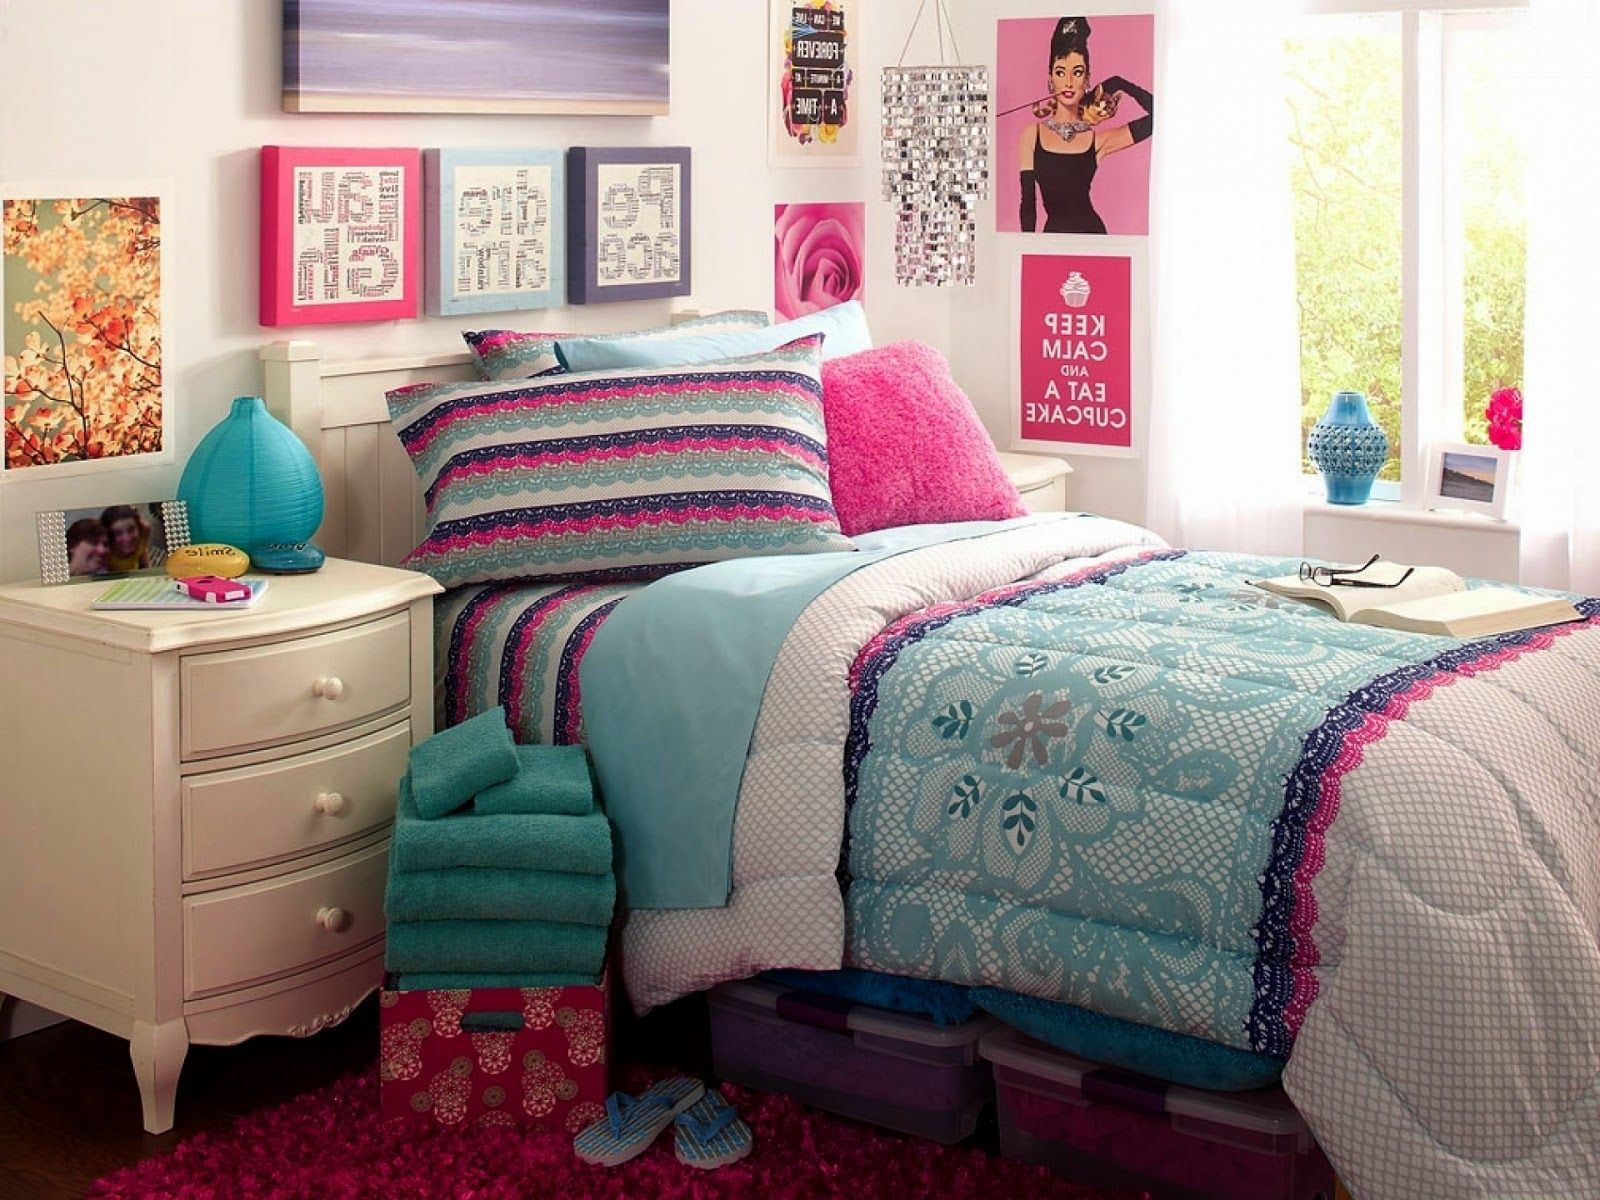 Cool Wall Art For Teenagers Ideas With Bedroom Diy Room Decor In Most Recently Released Wall Art For Teenage Girl Bedrooms (View 15 of 15)